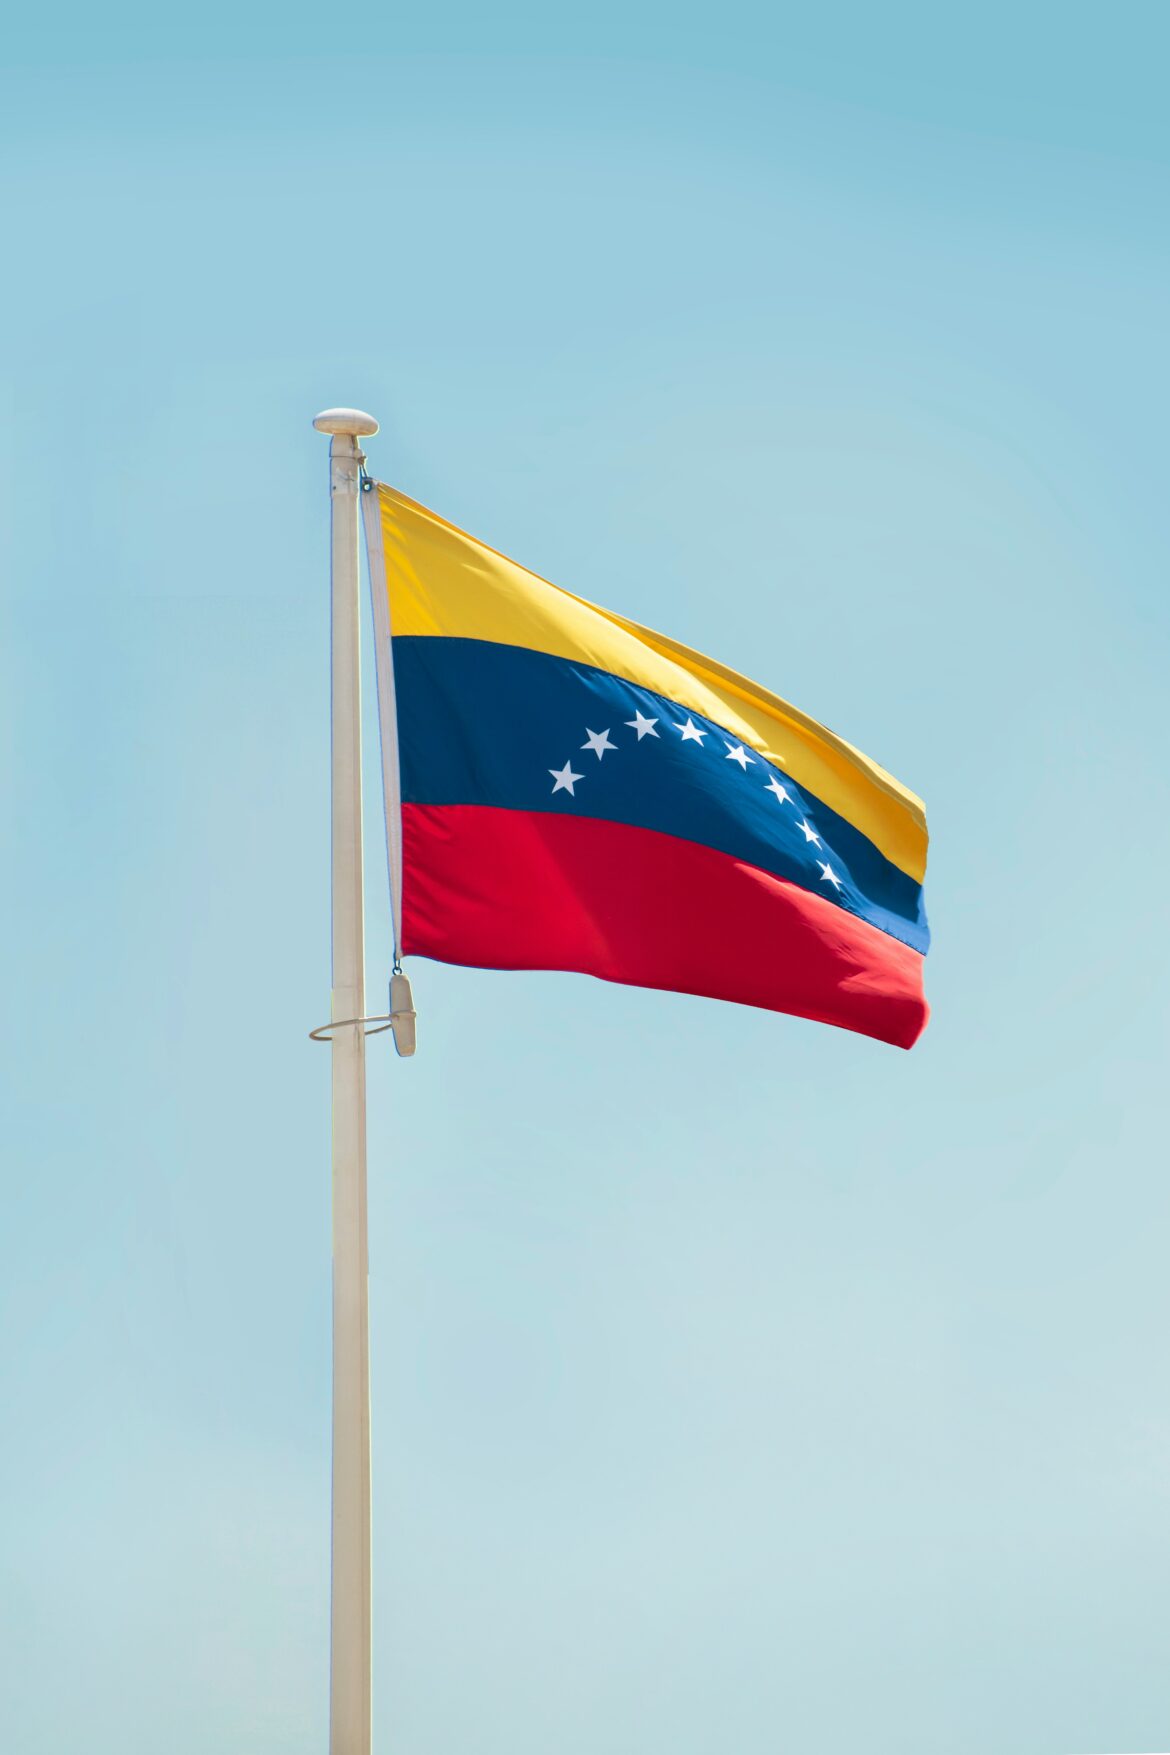 Venezuela: On the Verge of a Political Transformation After Recent Primary Elections?